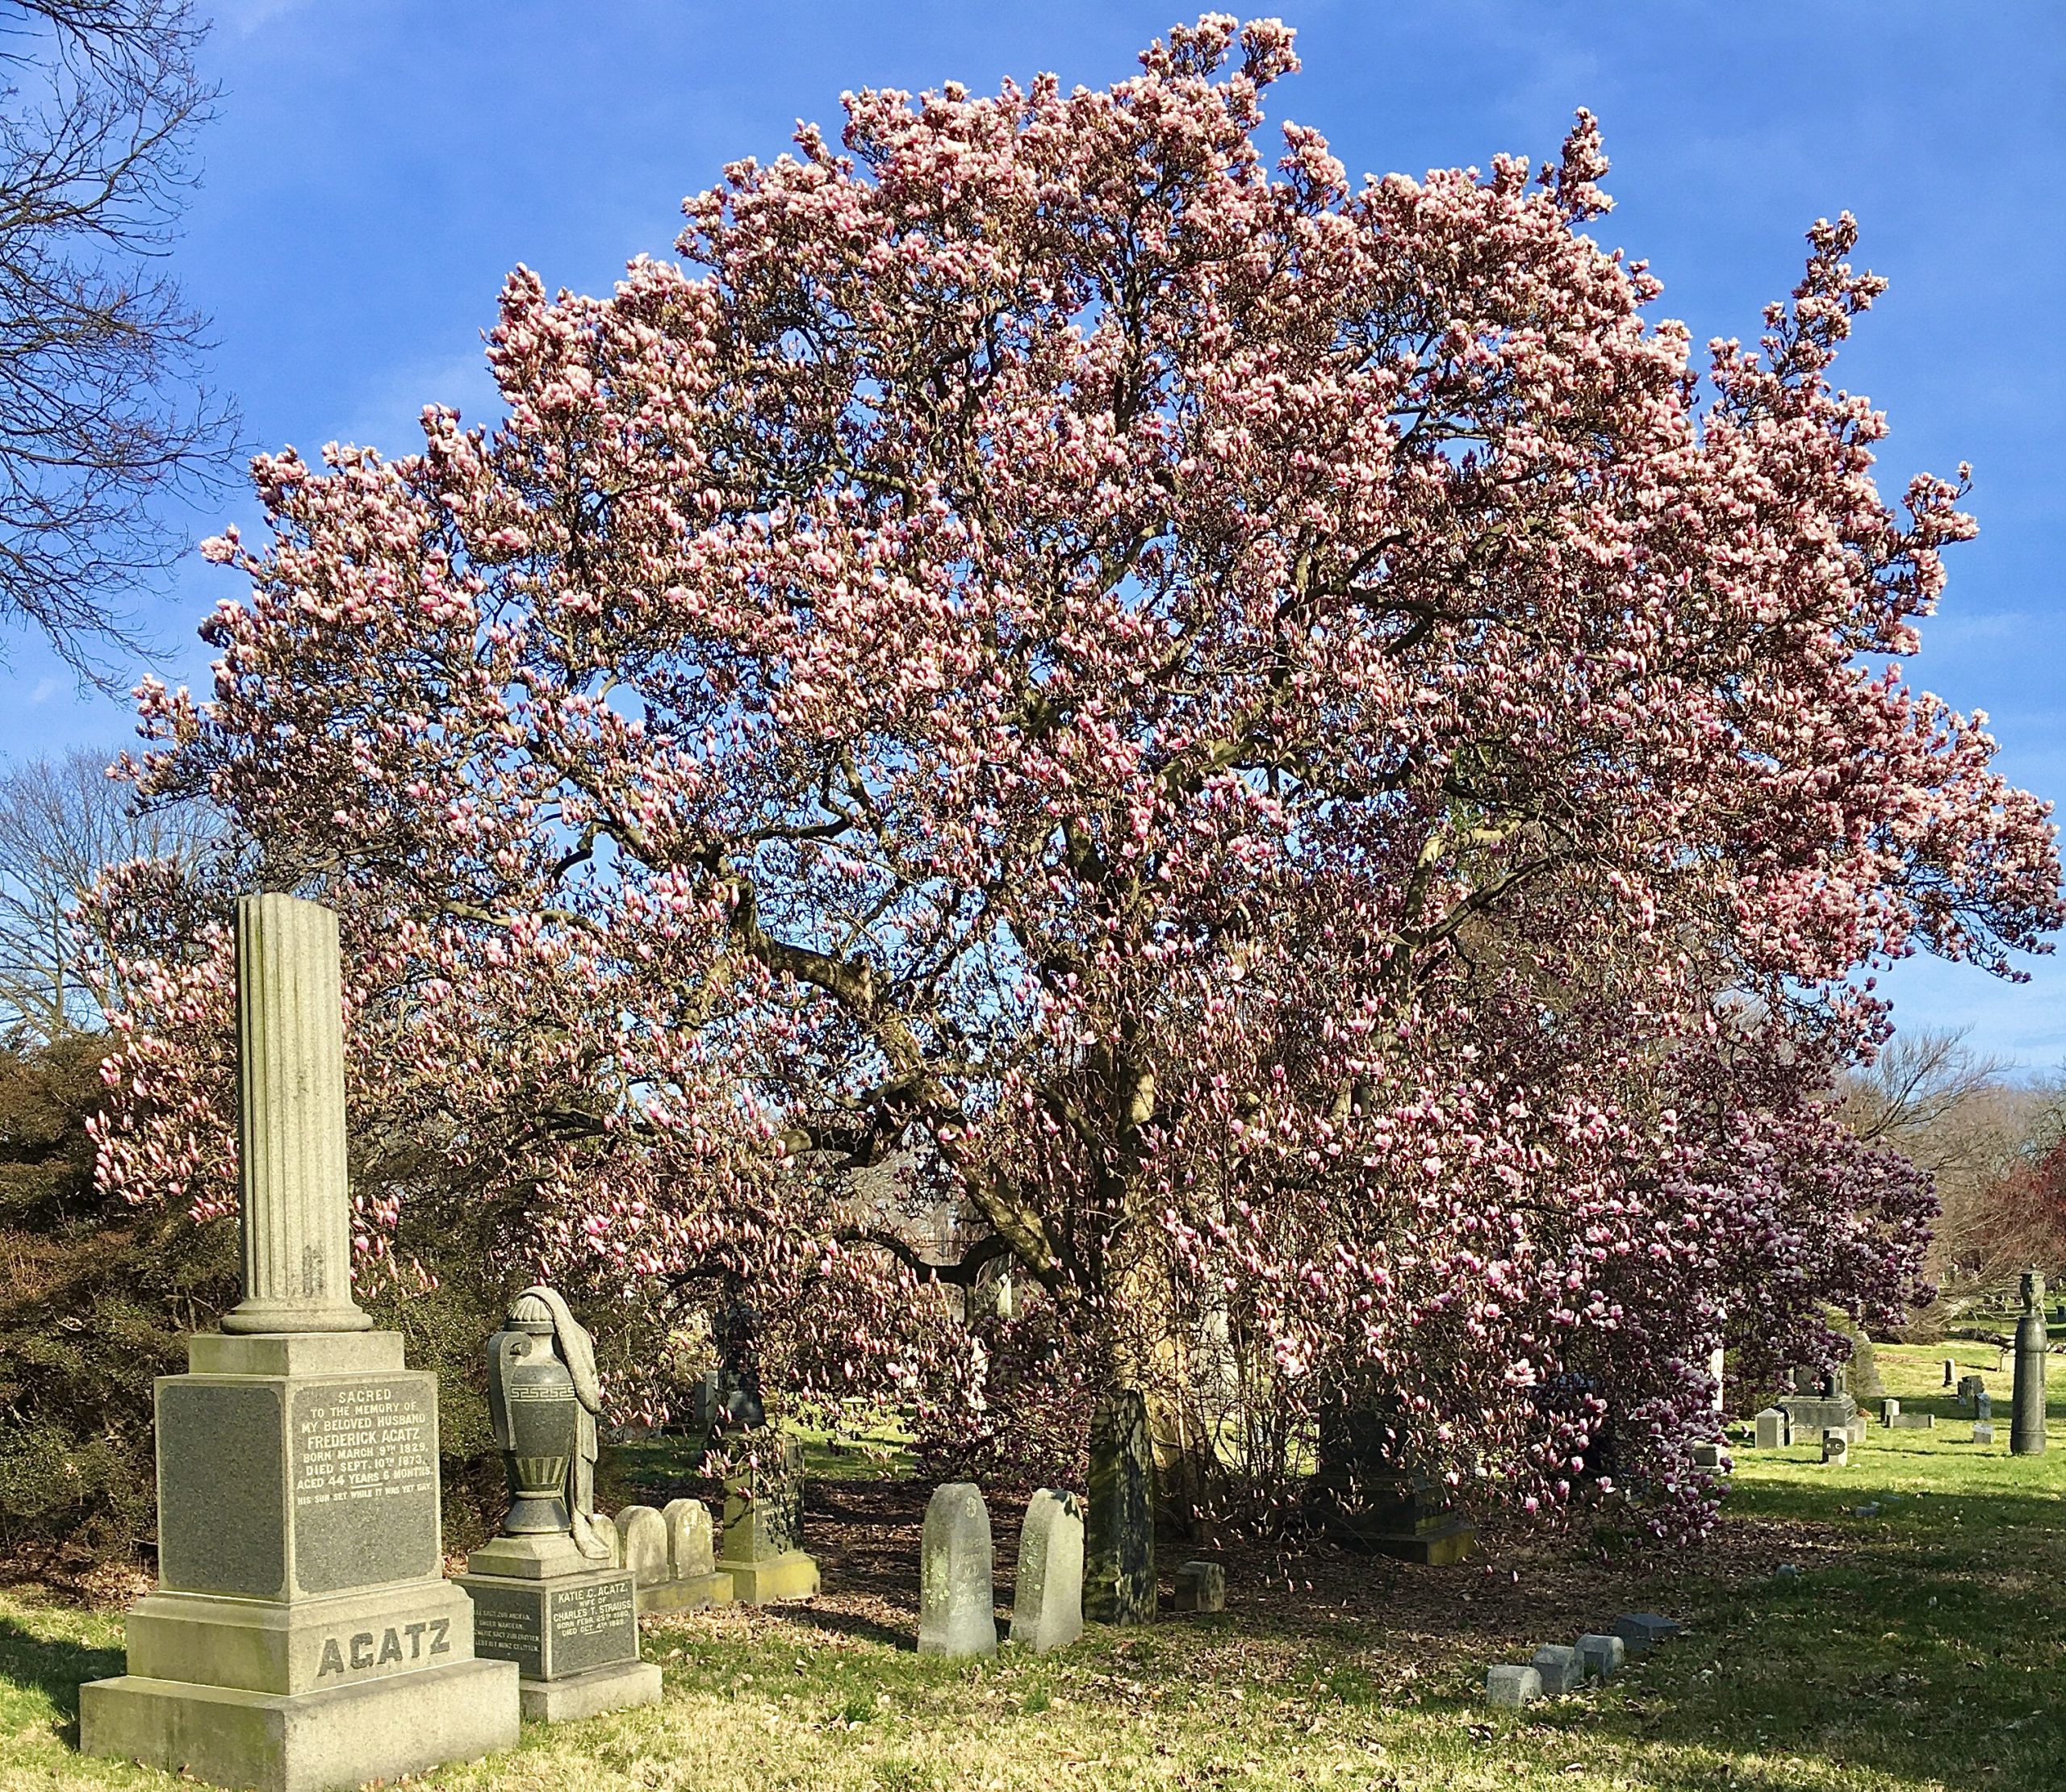 This magnificent magnolia tree stands beside Frederick Agatz’s monument. Photo: Lore Croghan/Brooklyn Eagle